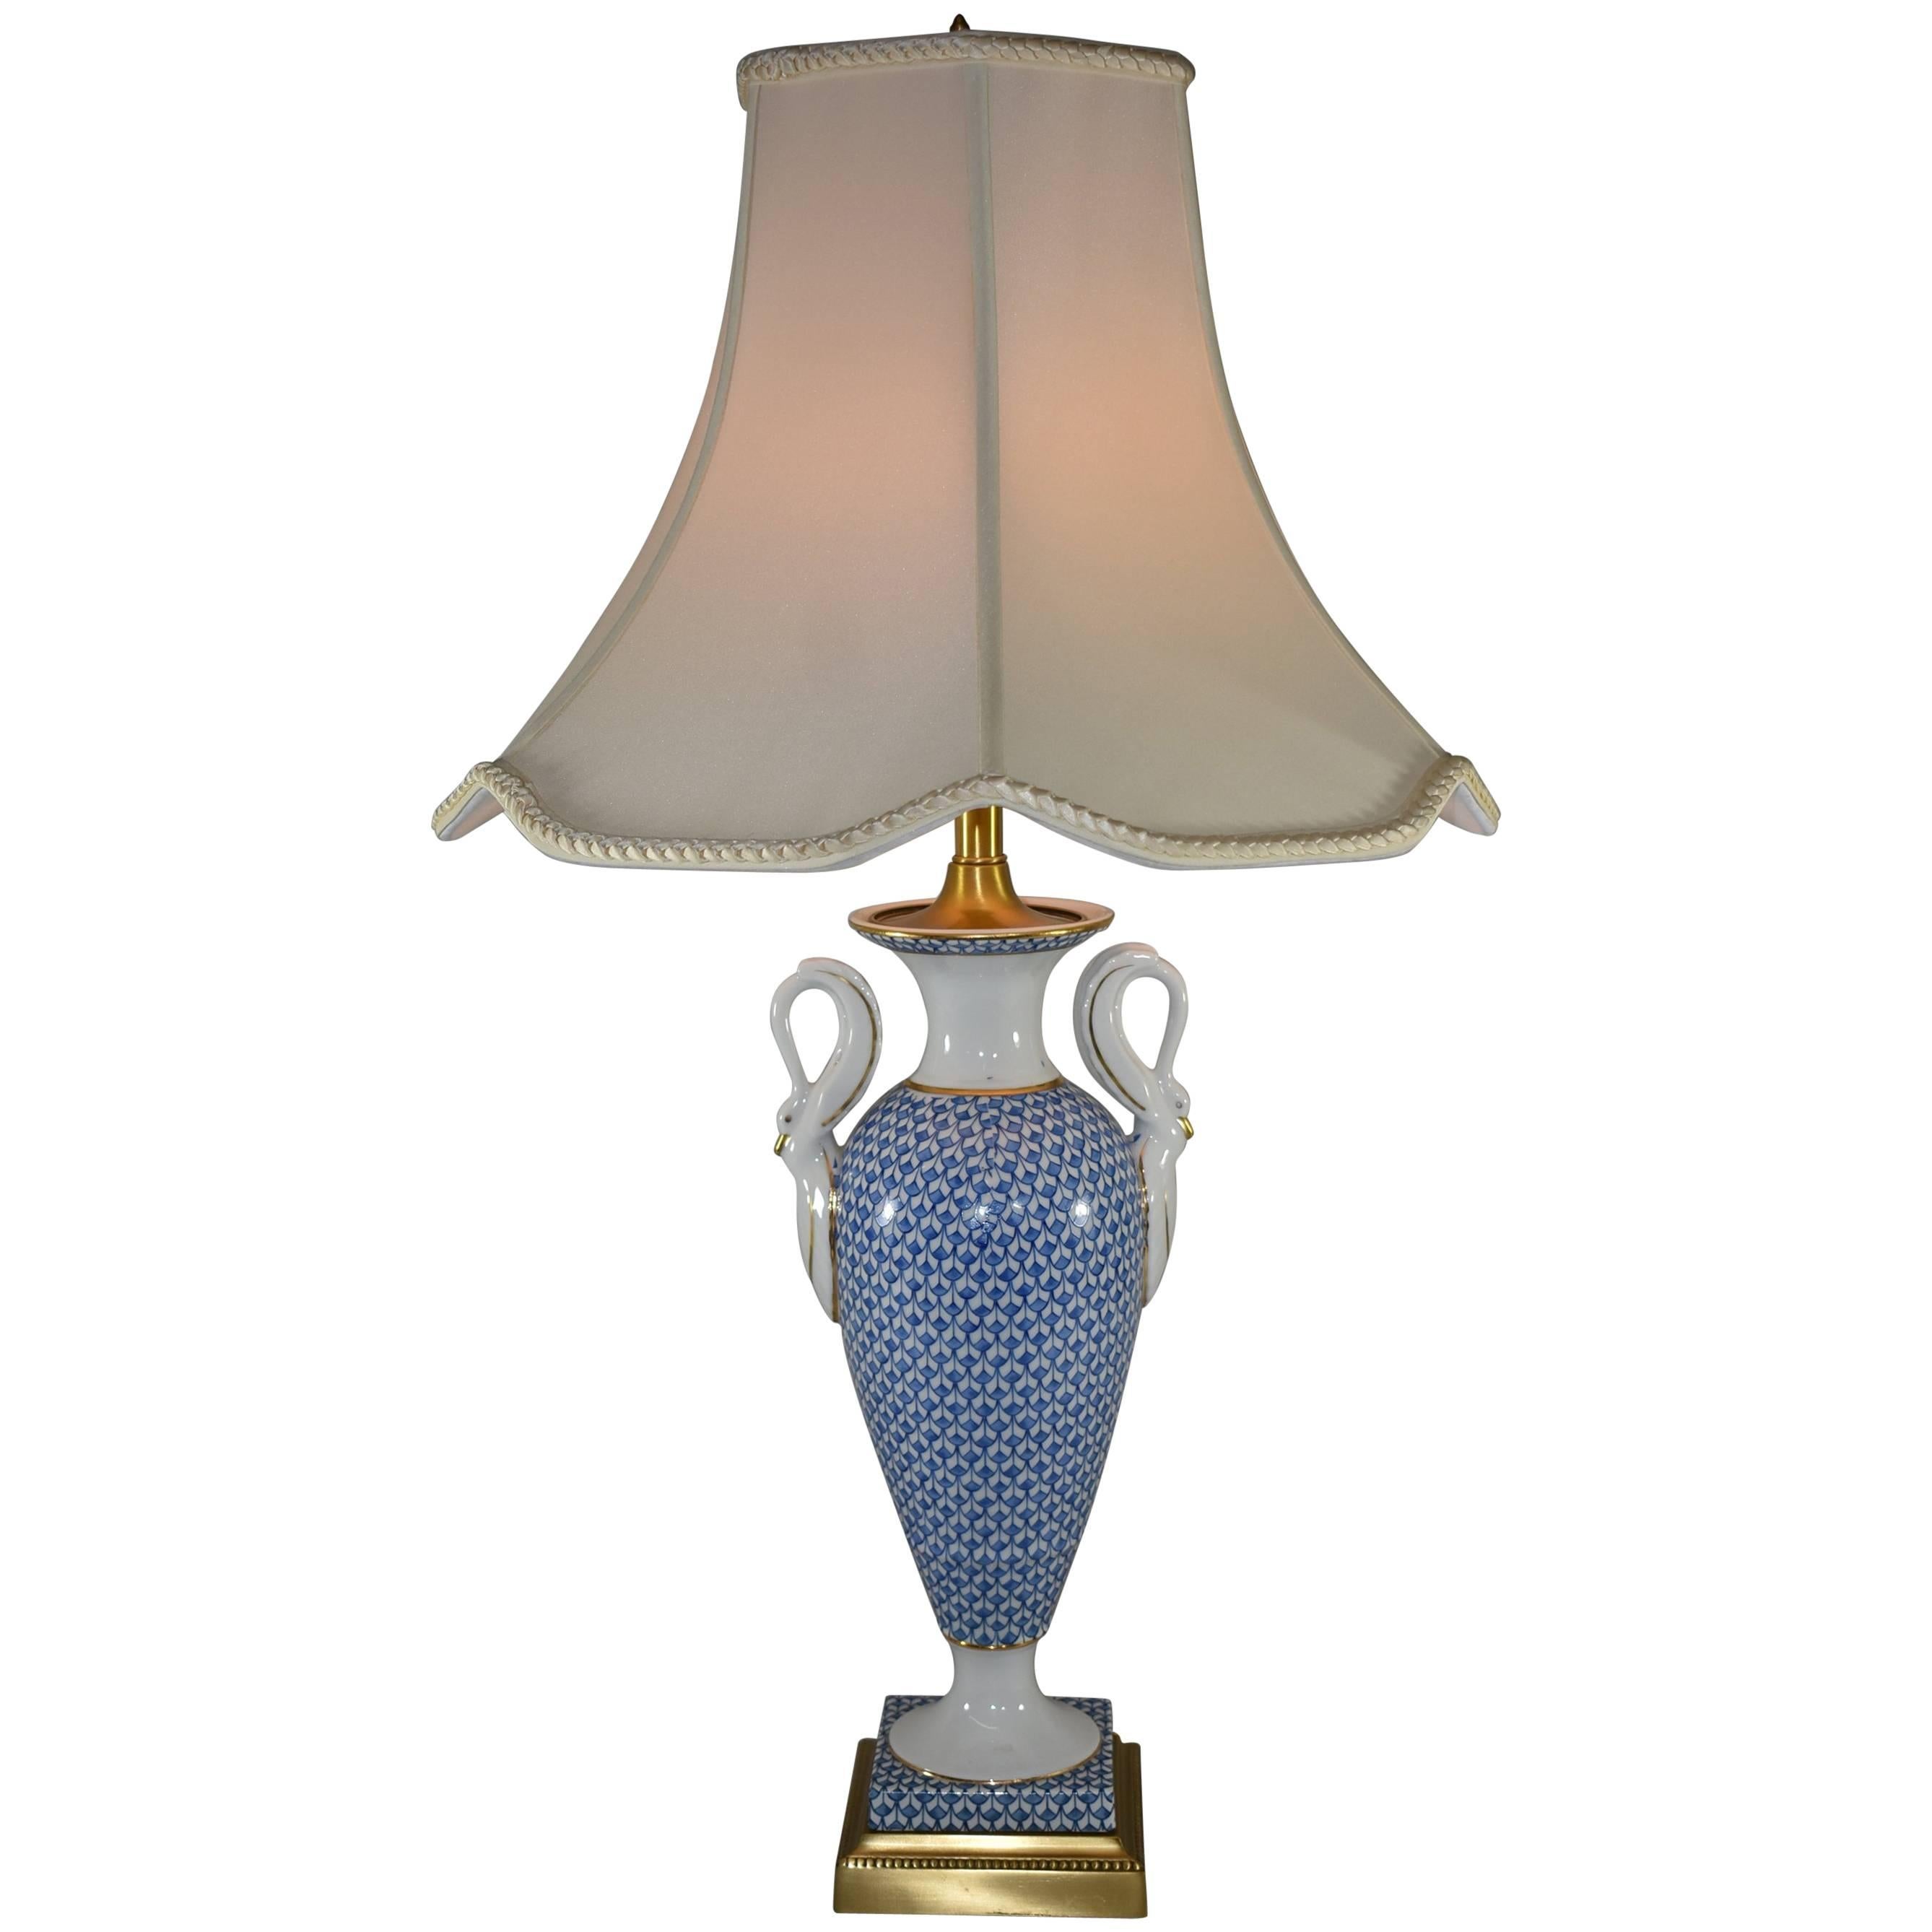 Porcelain Blue & White Fish Scale Table Lamp with Swan Detail, Frederick Cooper